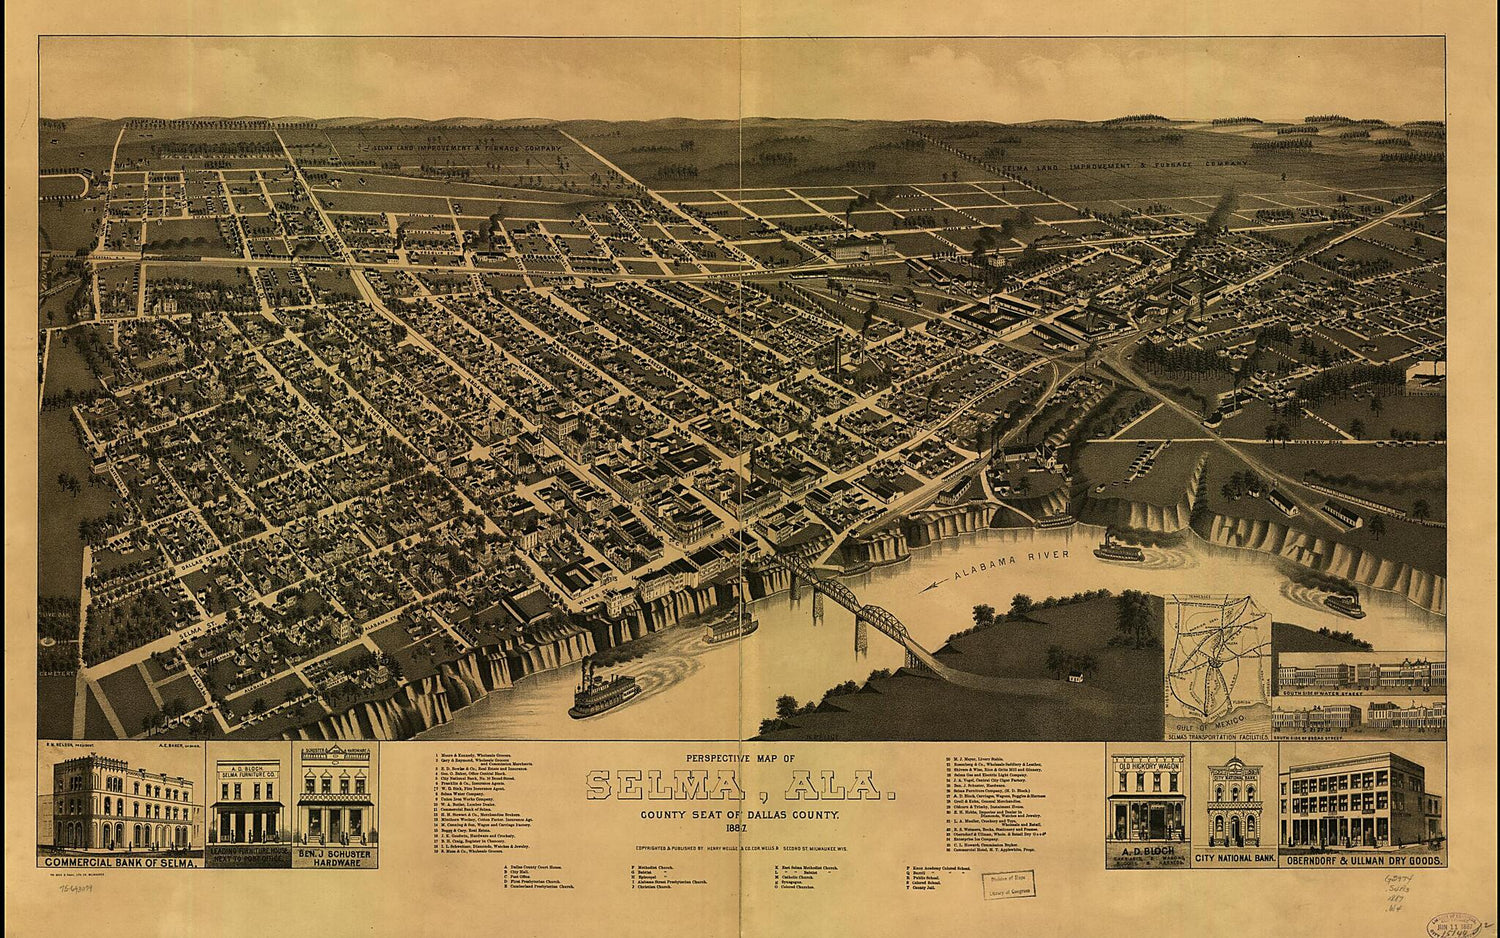 This old map of Perspective Map of Selma,Alabama County Seat of Dallas County from 1887 was created by  Beck &amp; Pauli,  Henry Wellge &amp; Co, H. (Henry) Wellge in 1887